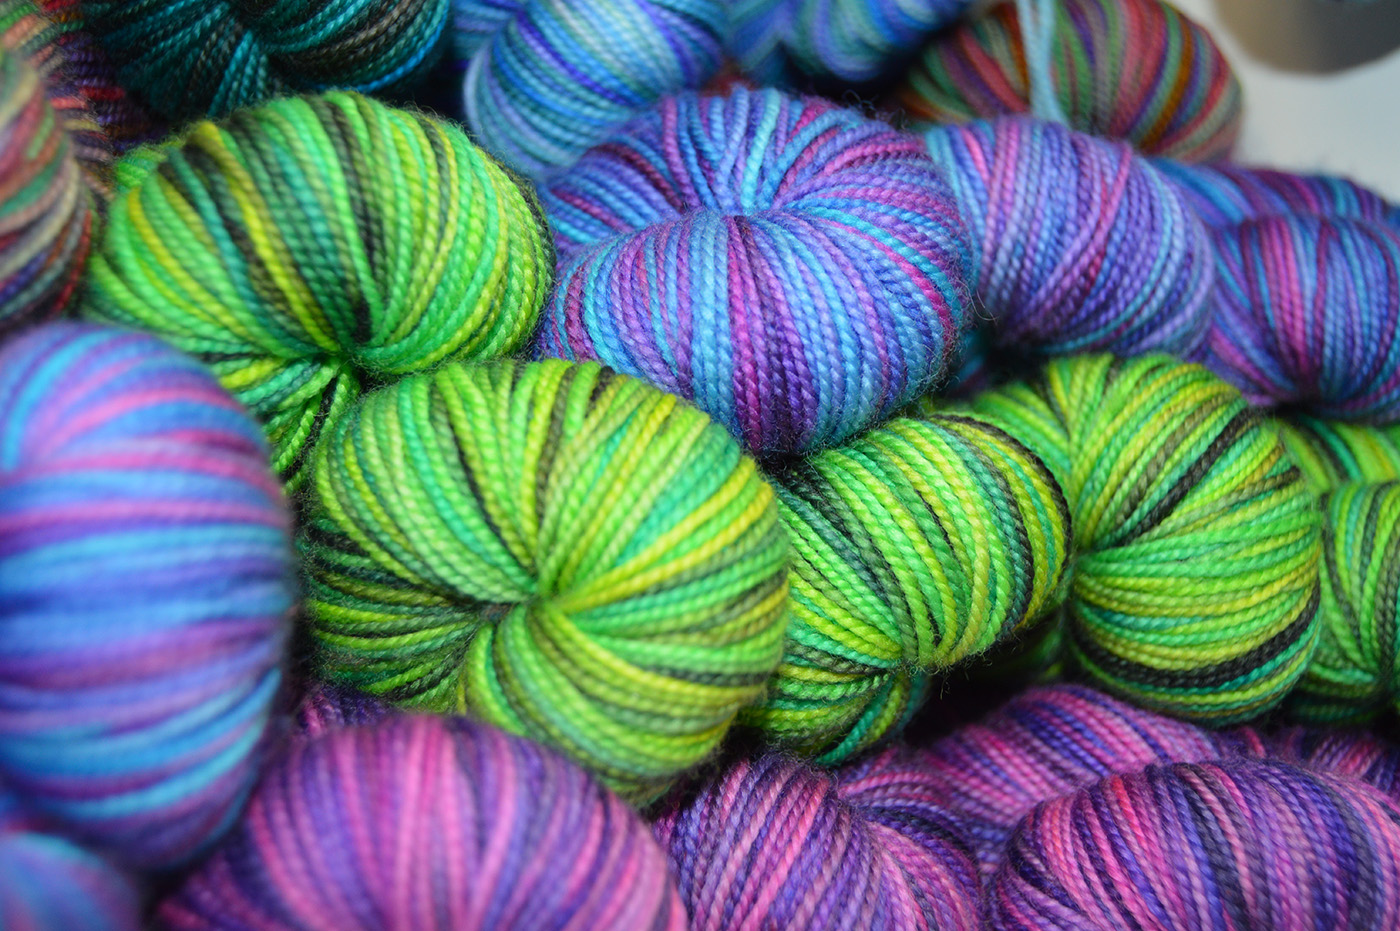 Break out the knitting needles for Yarn Crawl